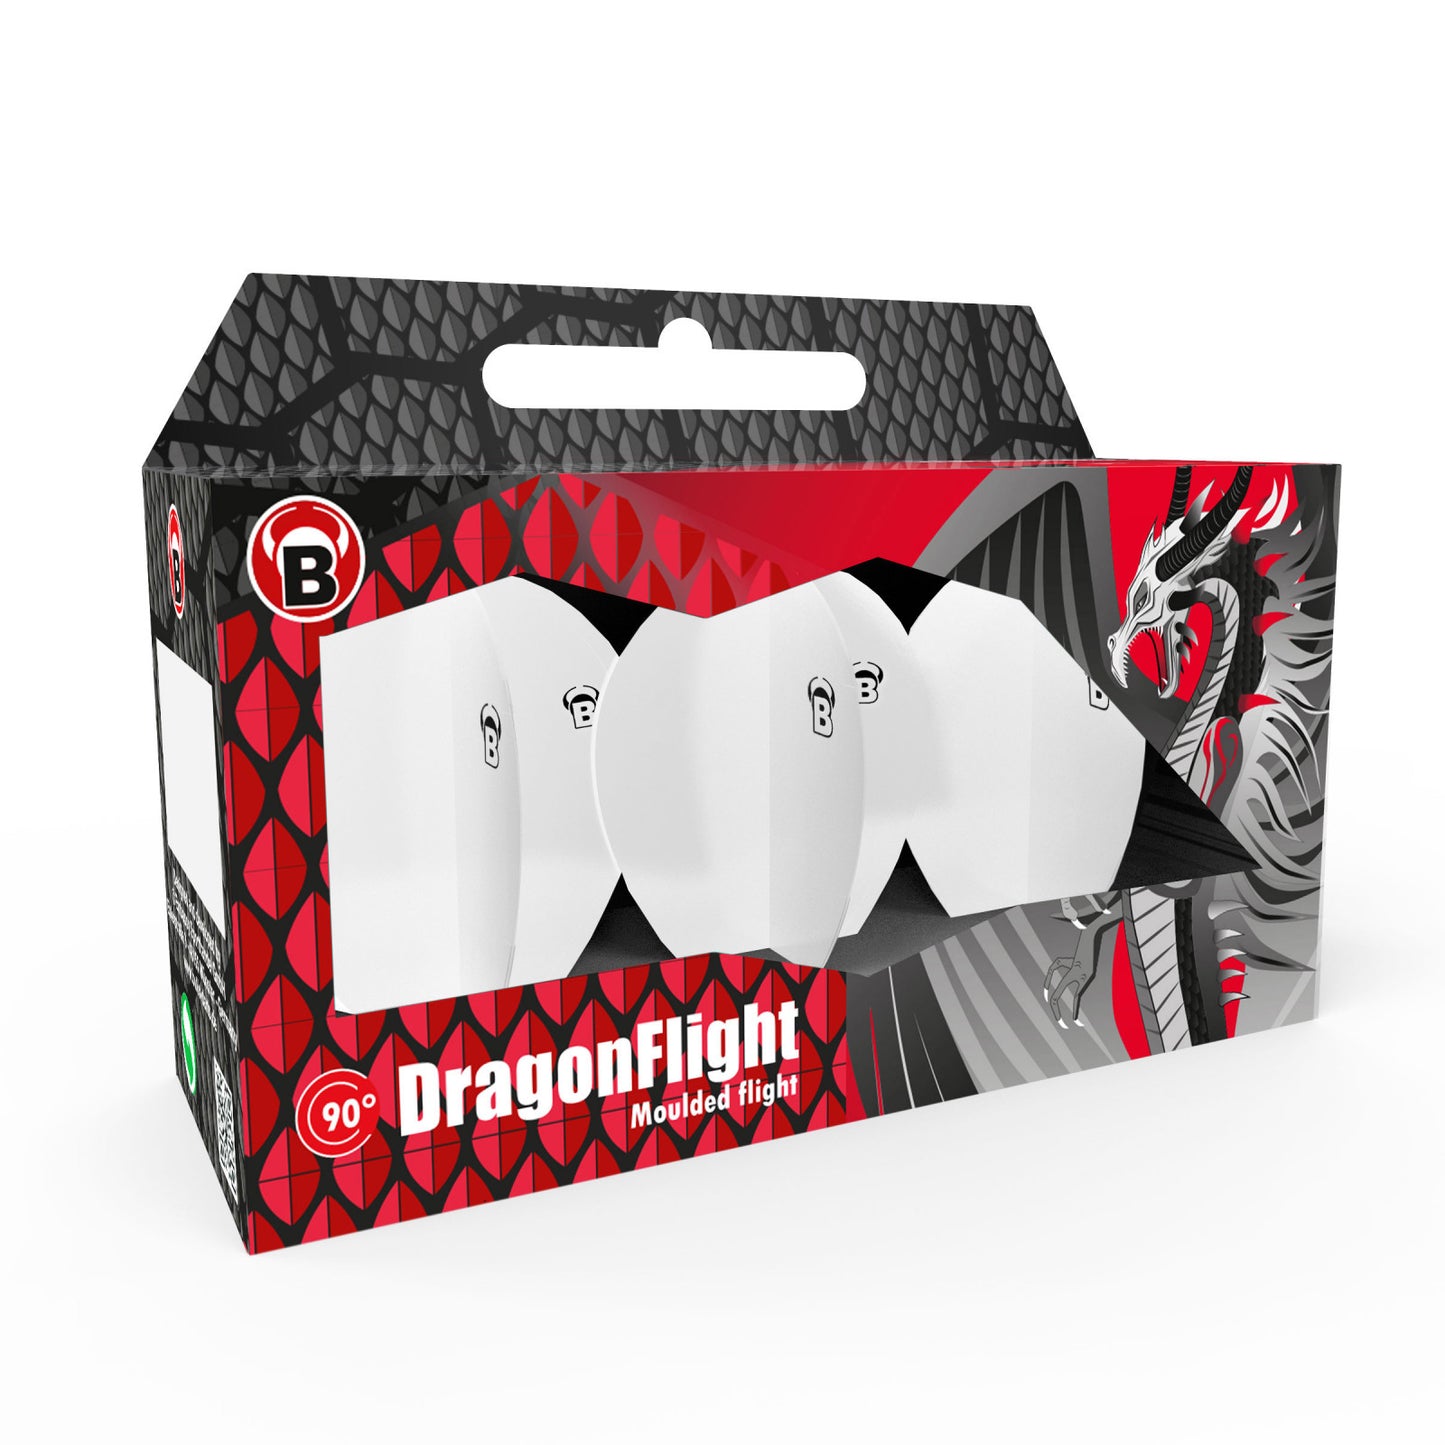 BULL'S DragonFlights - STANDARD - 200 MICRONS - EXTRA STRONG FLIGHTS